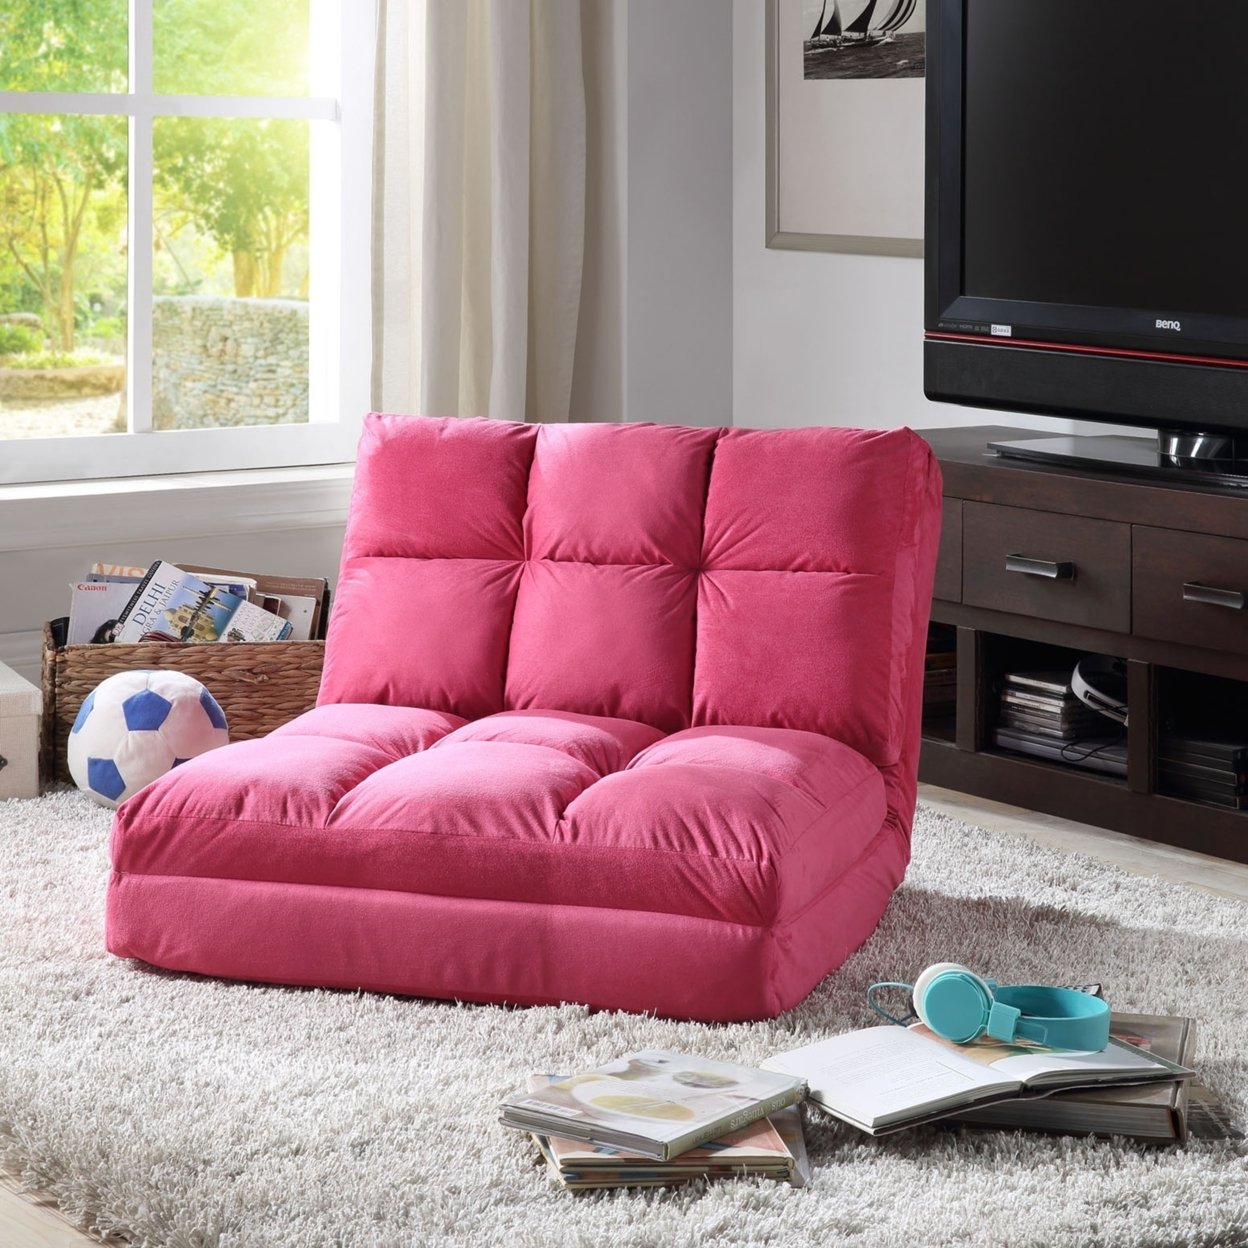 Loungie Beige Flip Chair-5 Position Adjustable-Sleeper-Dorm Bed-Lounger Seat or Sofa-Portable - Fuchsia - pink